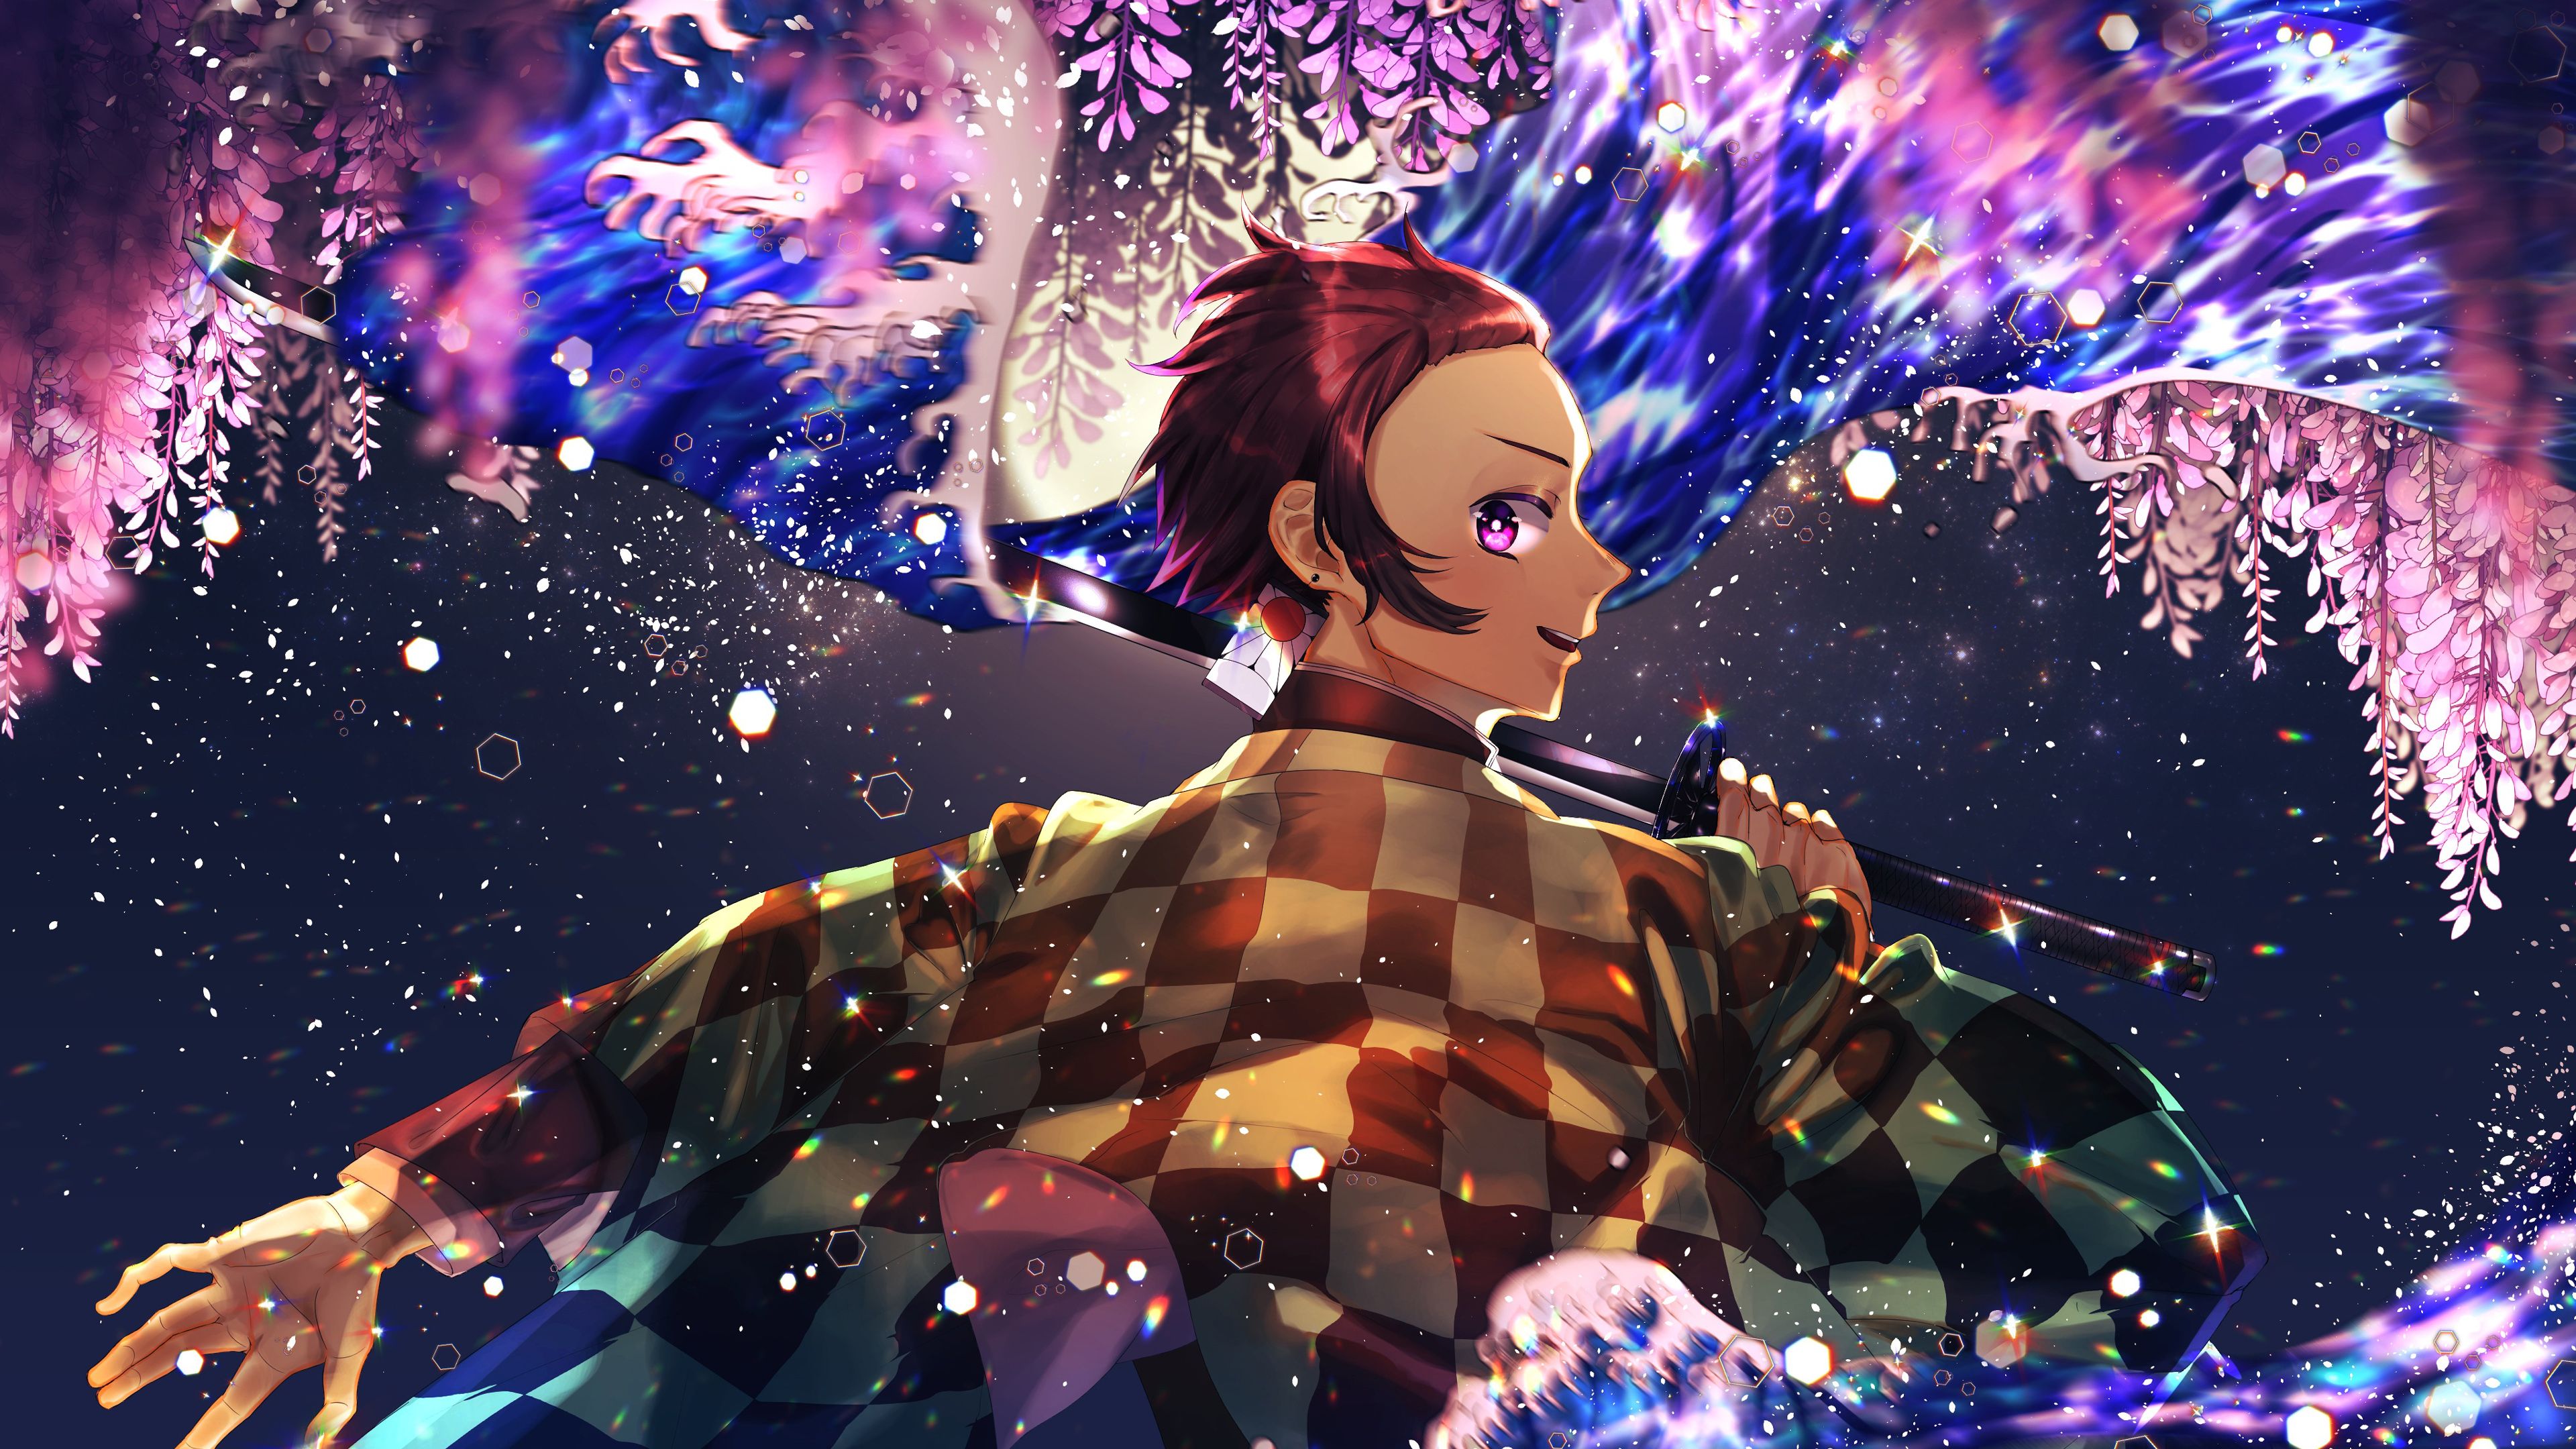 Demon Slayer Tanjirou Kamado With Sword With Background Of Black And Blue Purple Flowers 4K HD Anime Wallpaper